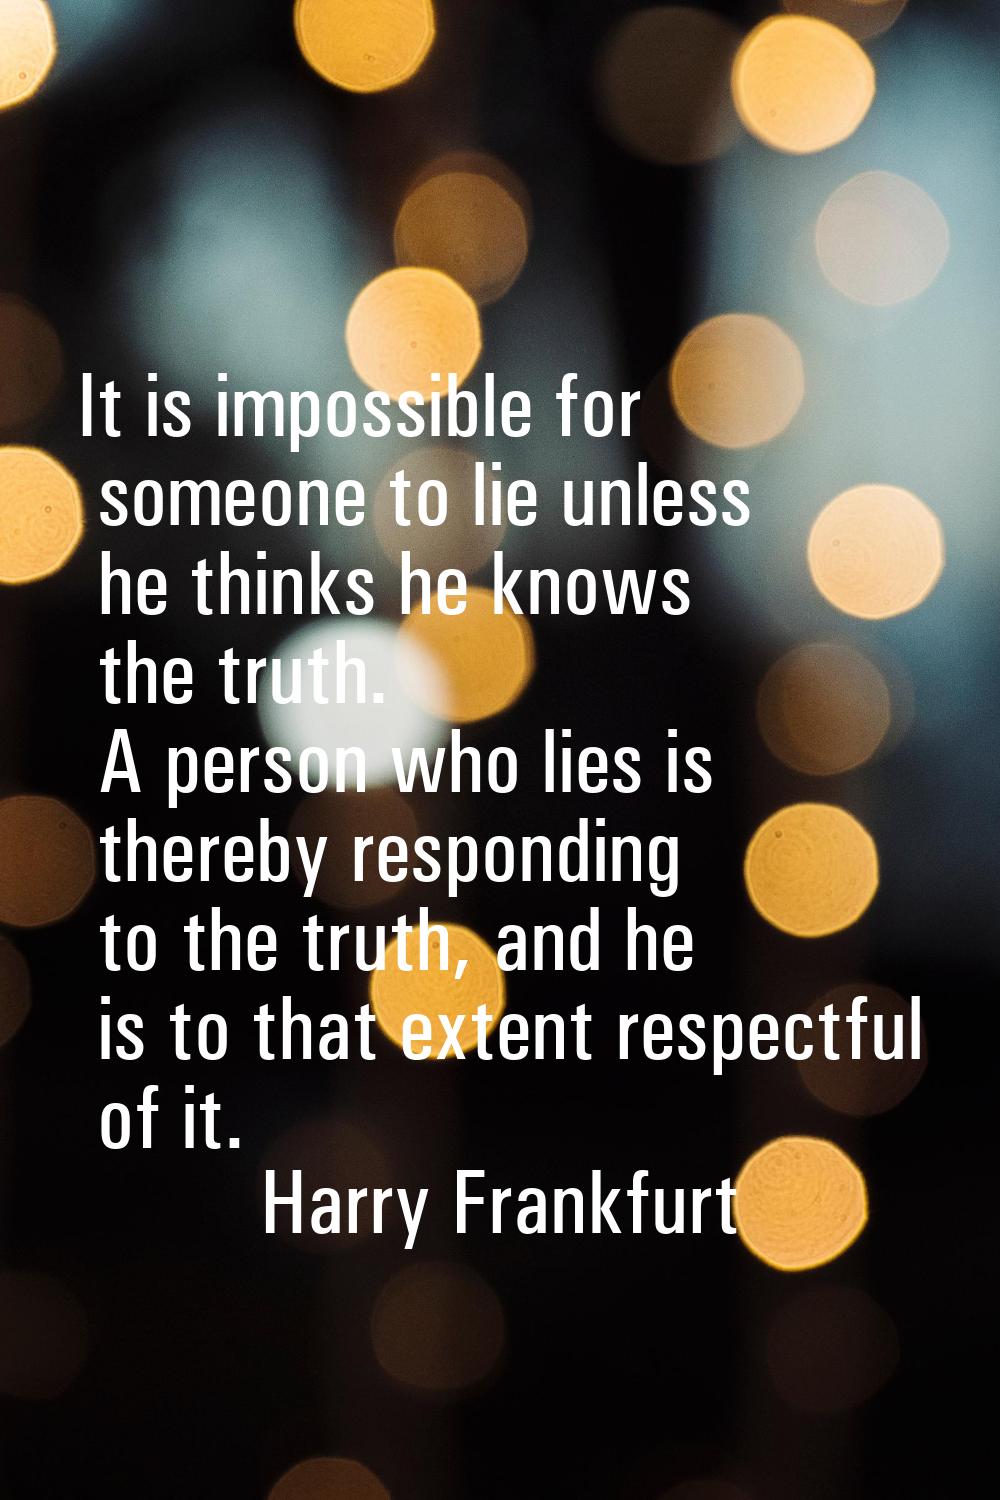 It is impossible for someone to lie unless he thinks he knows the truth. A person who lies is there